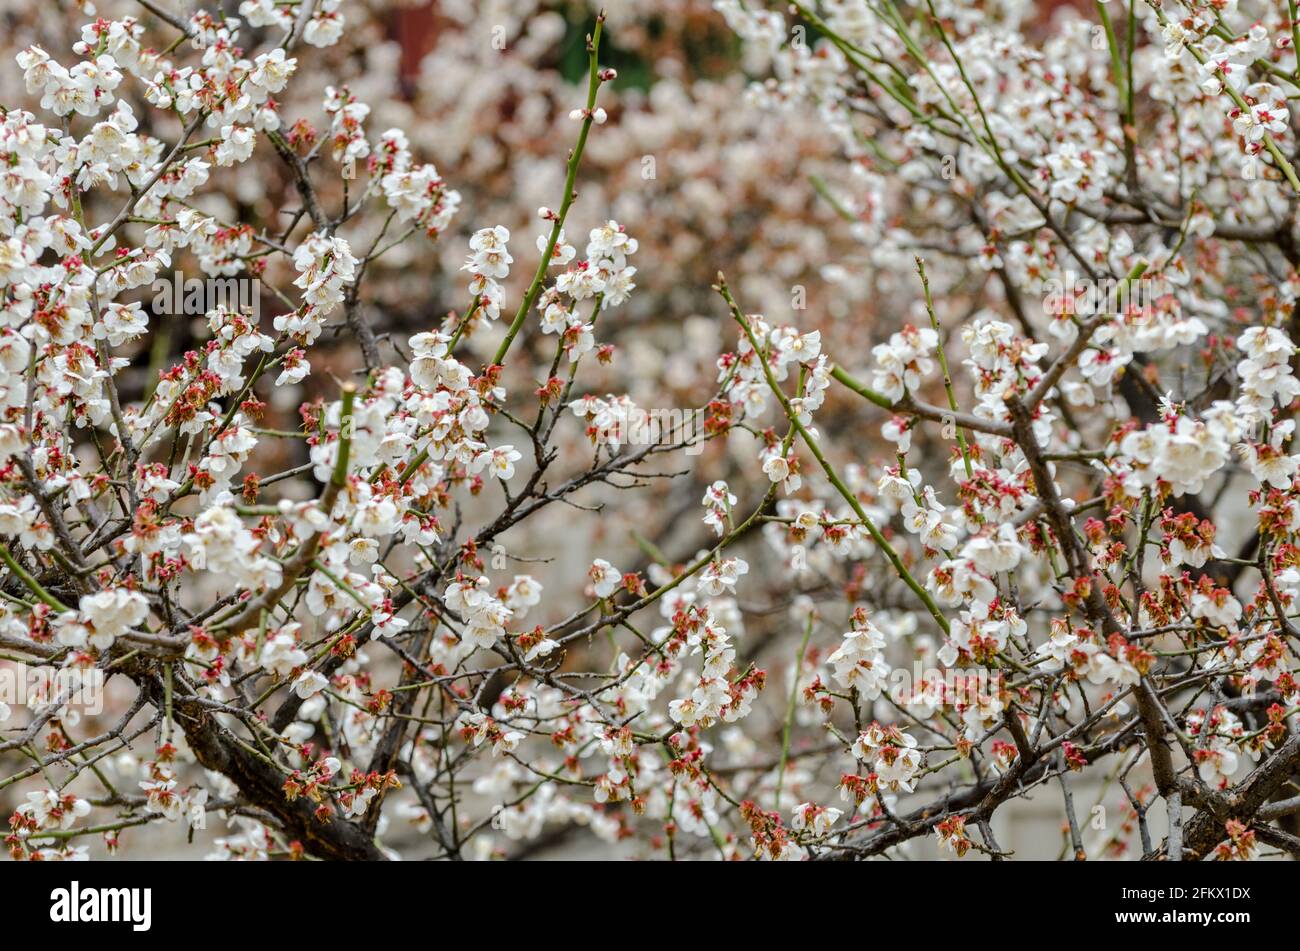 Cherry blossom's details at Changdeokgung Palace in Seoul, South Korea Stock Photo